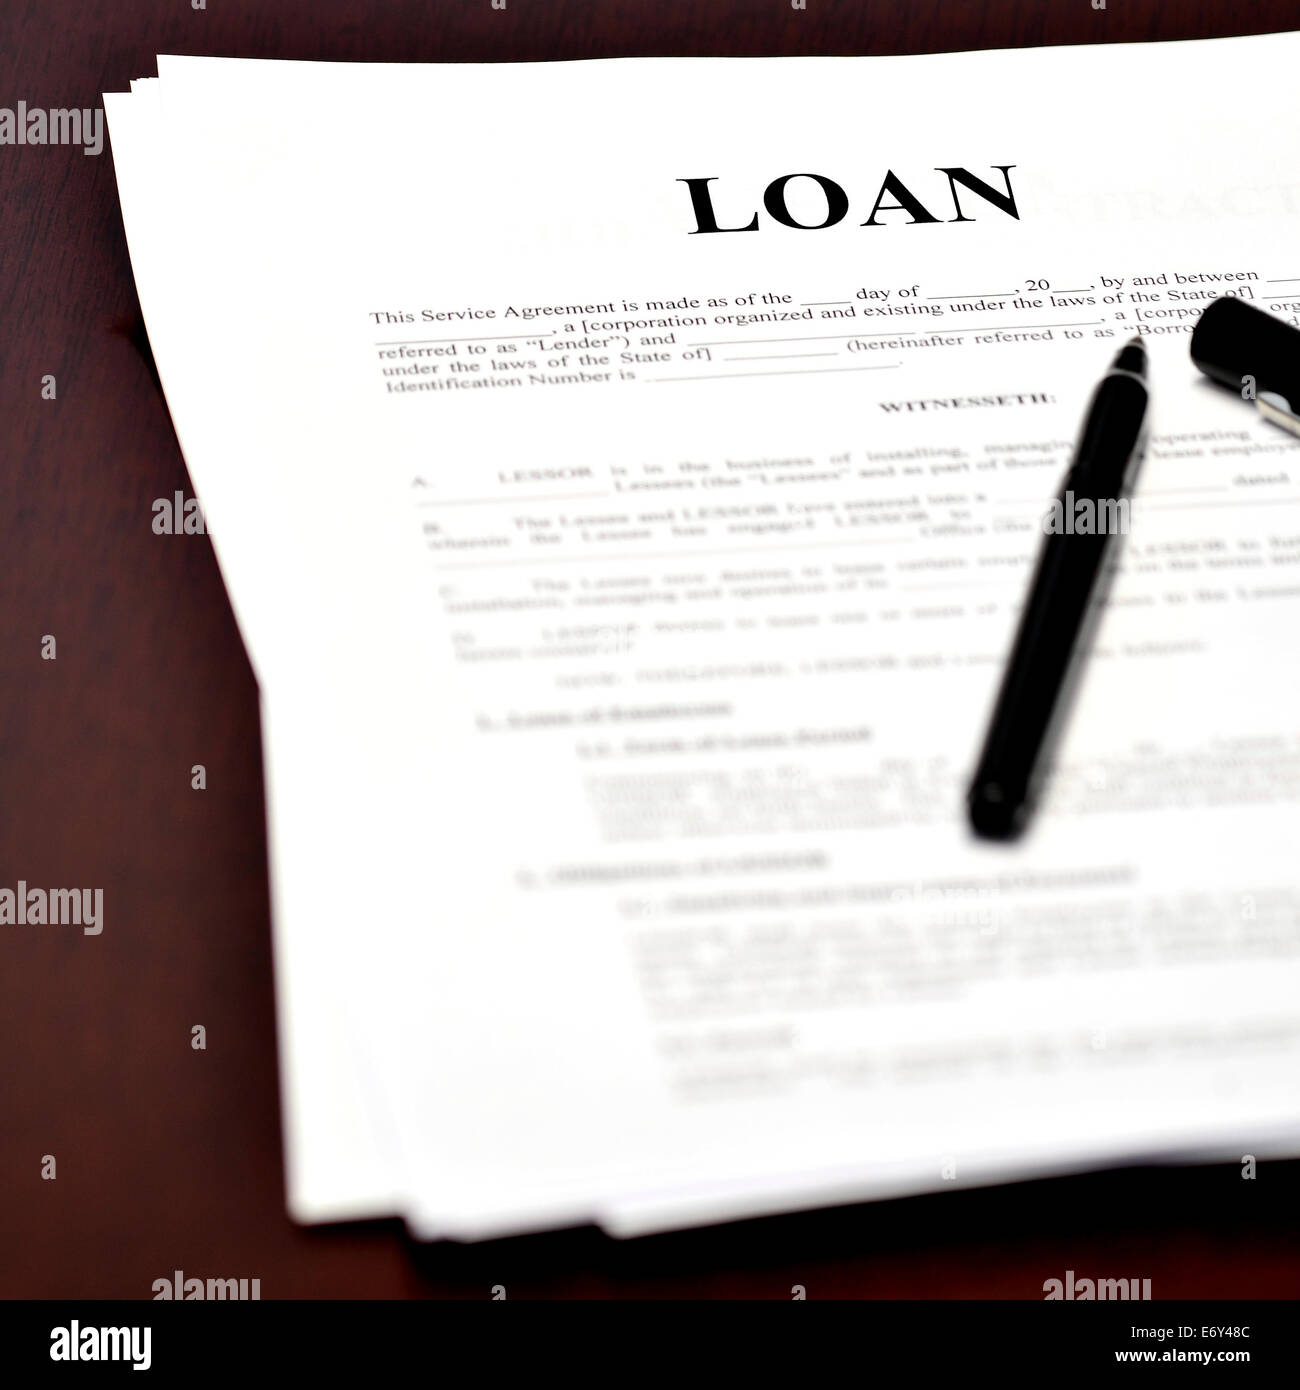 Loan document and agreement with pen for signing Stock Photo